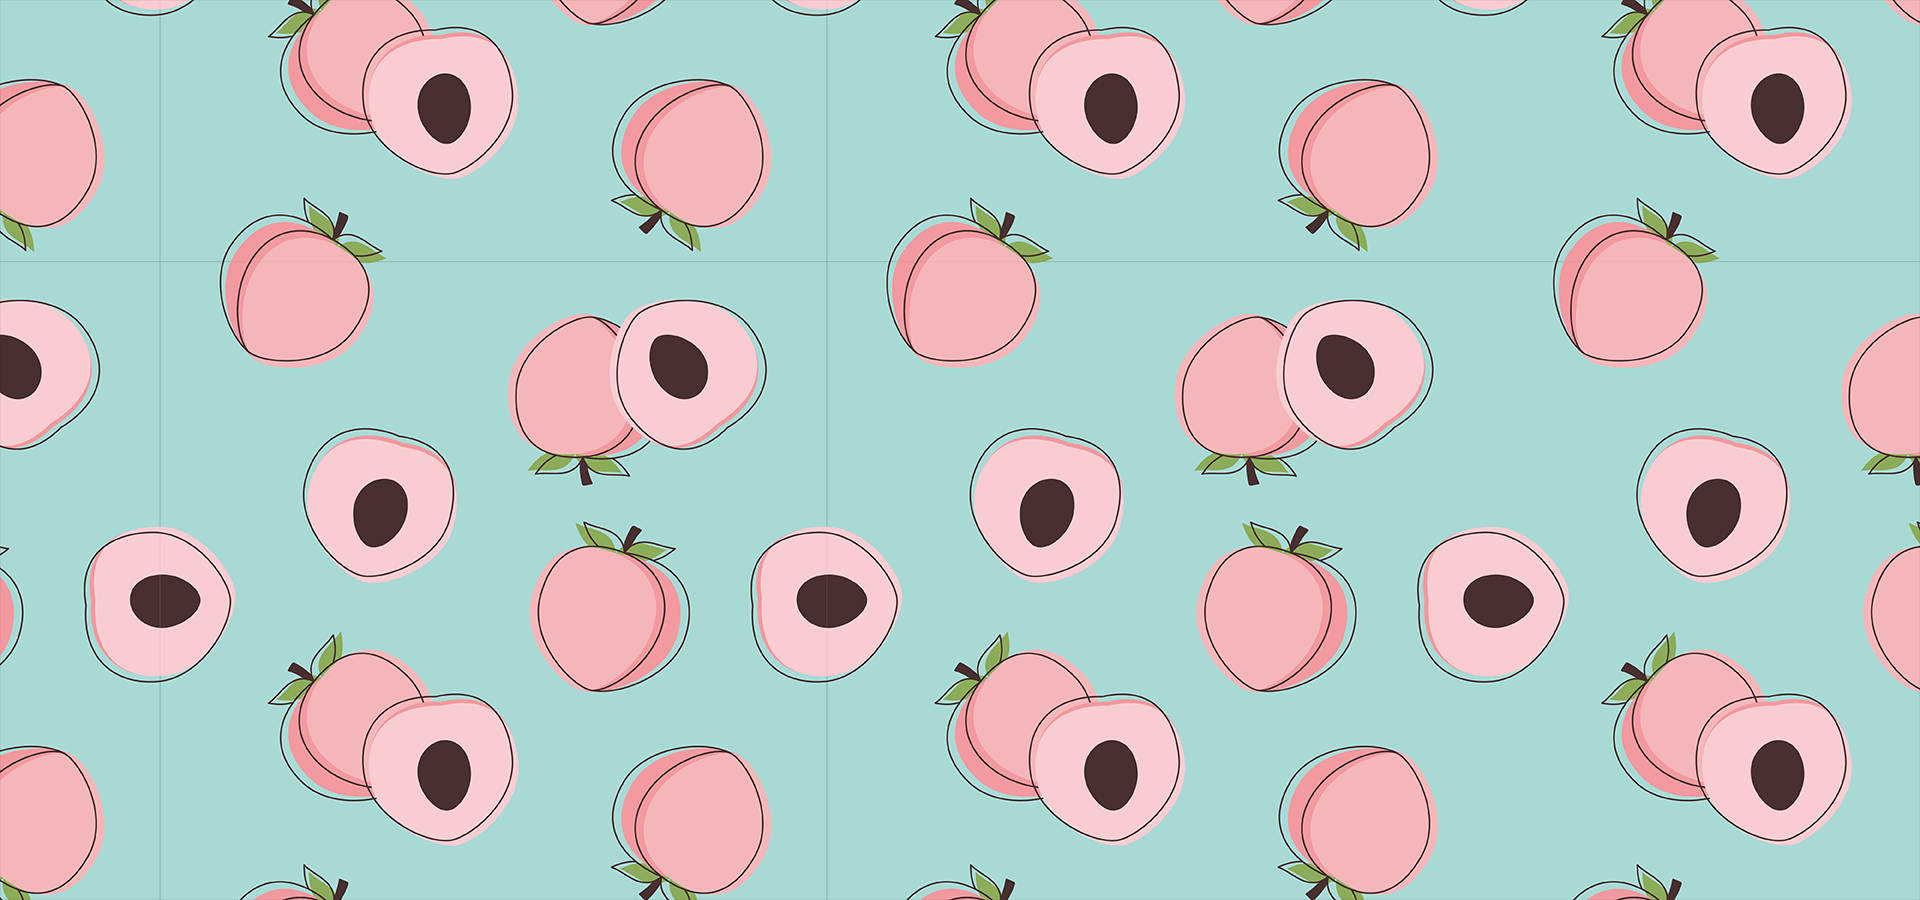 Displaying Peachy Sophistication - Your Aesthetic Laptop Pal Wallpaper